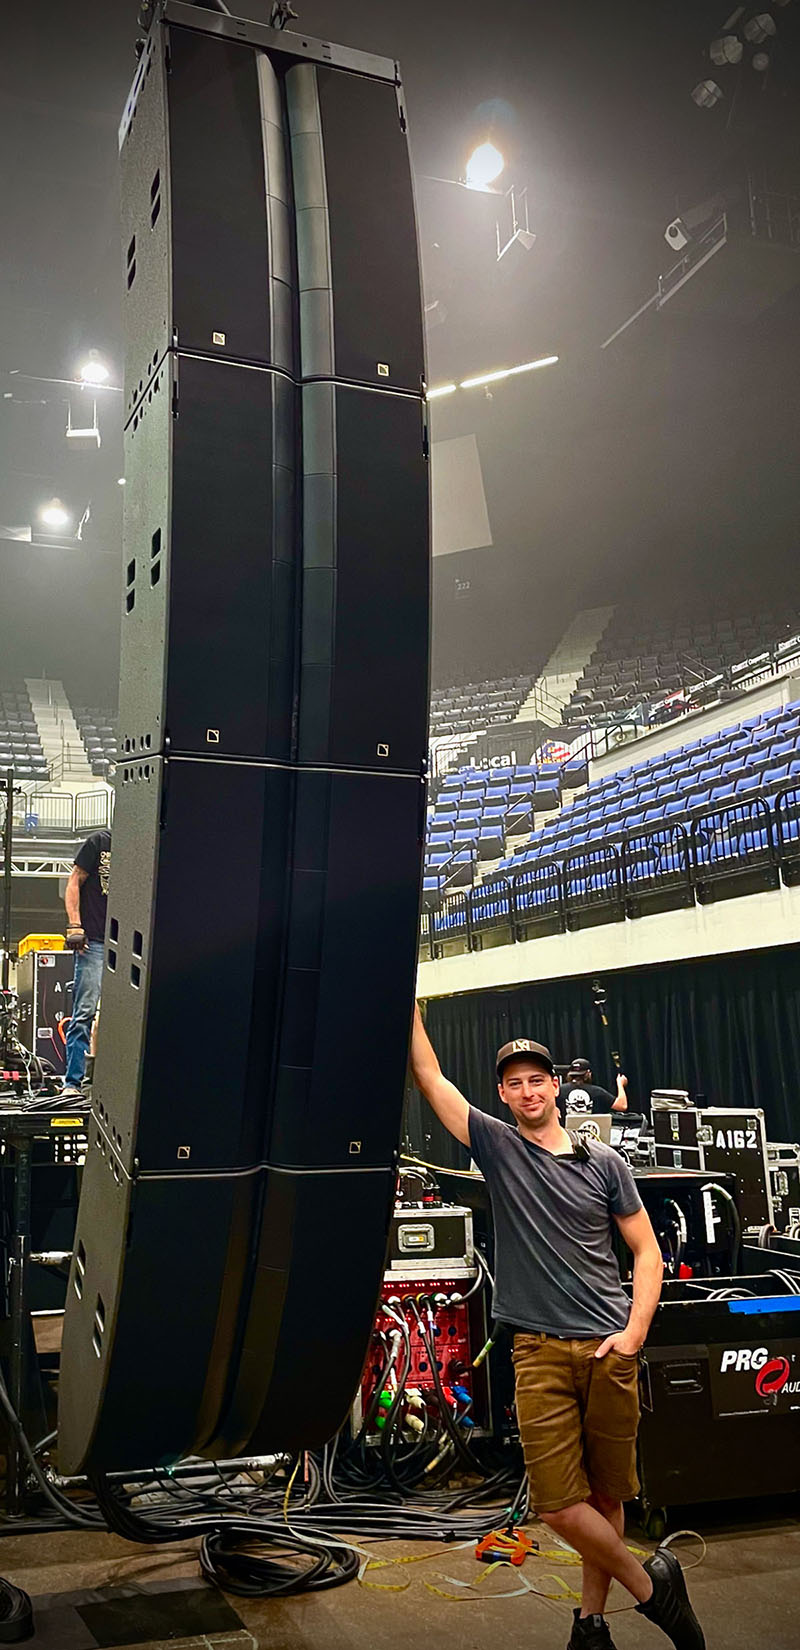 PRG system engineer Steve Thom with one of the Dreamsonic tour’s L Series arrays